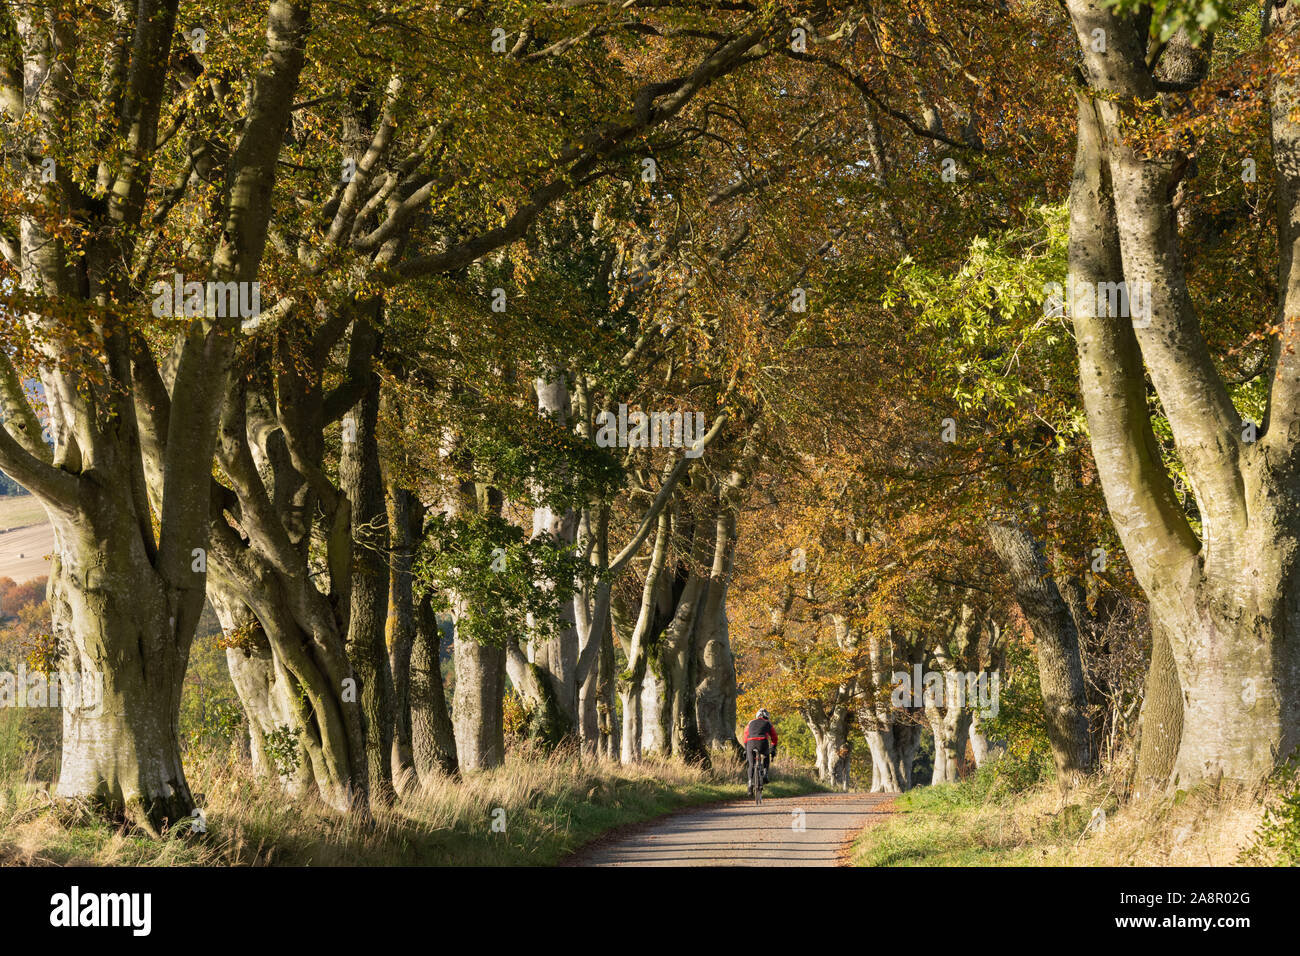 A Lone Cyclist Passing Through a Tunnel of Beech Trees (Fagus Sylvatica) on a Quiet Aberdeenshire Country Lane in Autumn Stock Photo